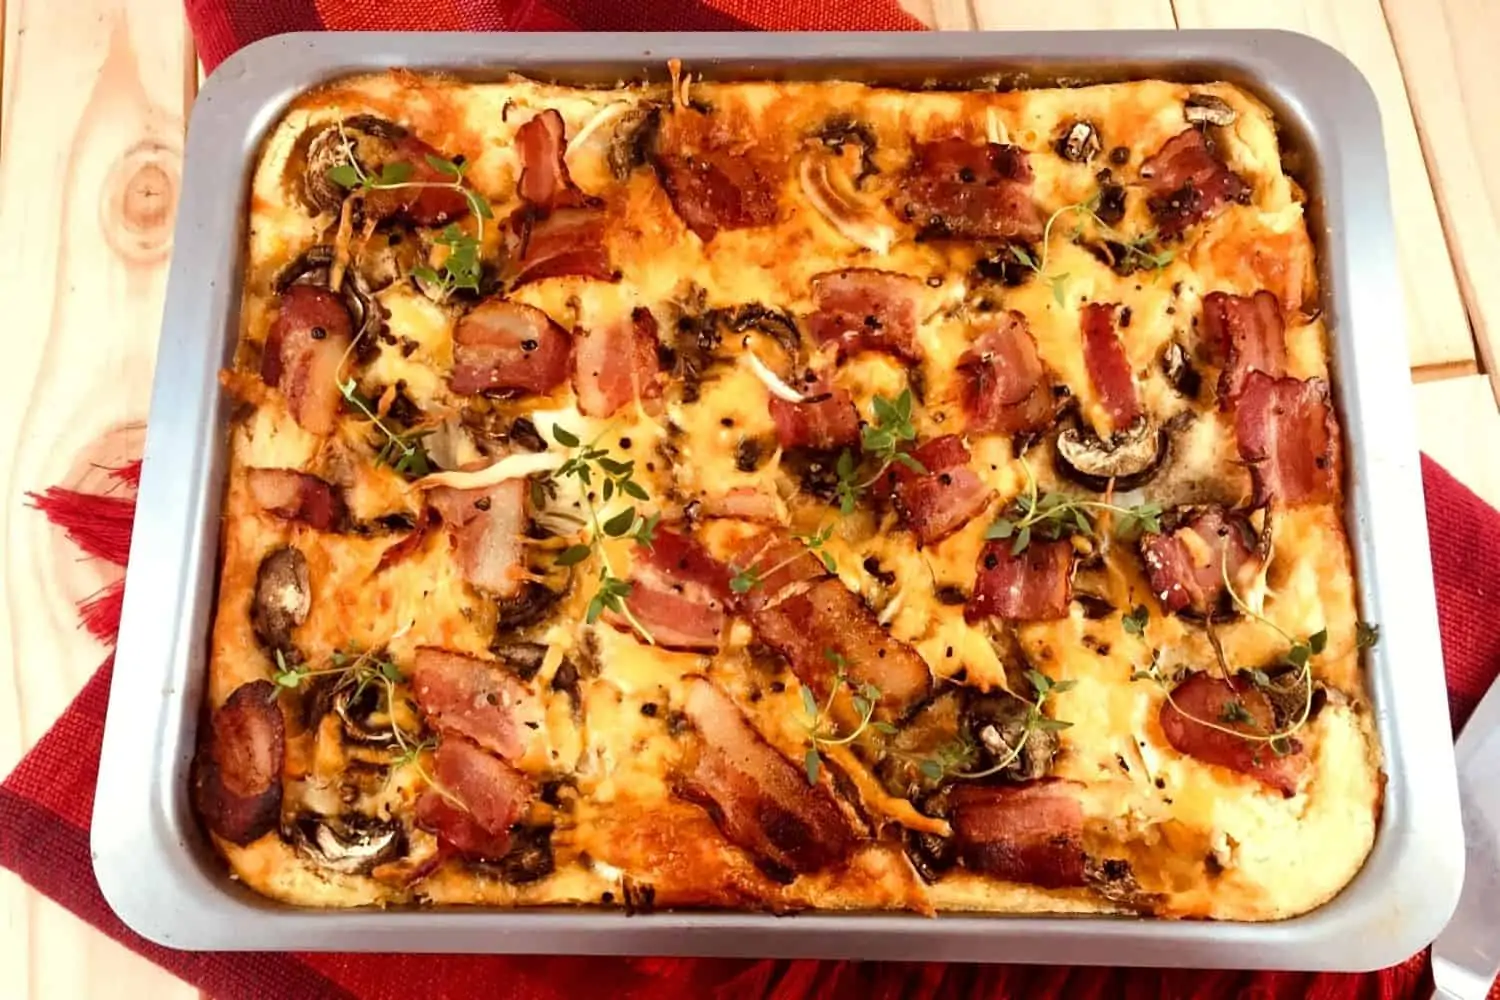 Mielie Pap Tart Baked with Bacon, Mushrooms and Cheese